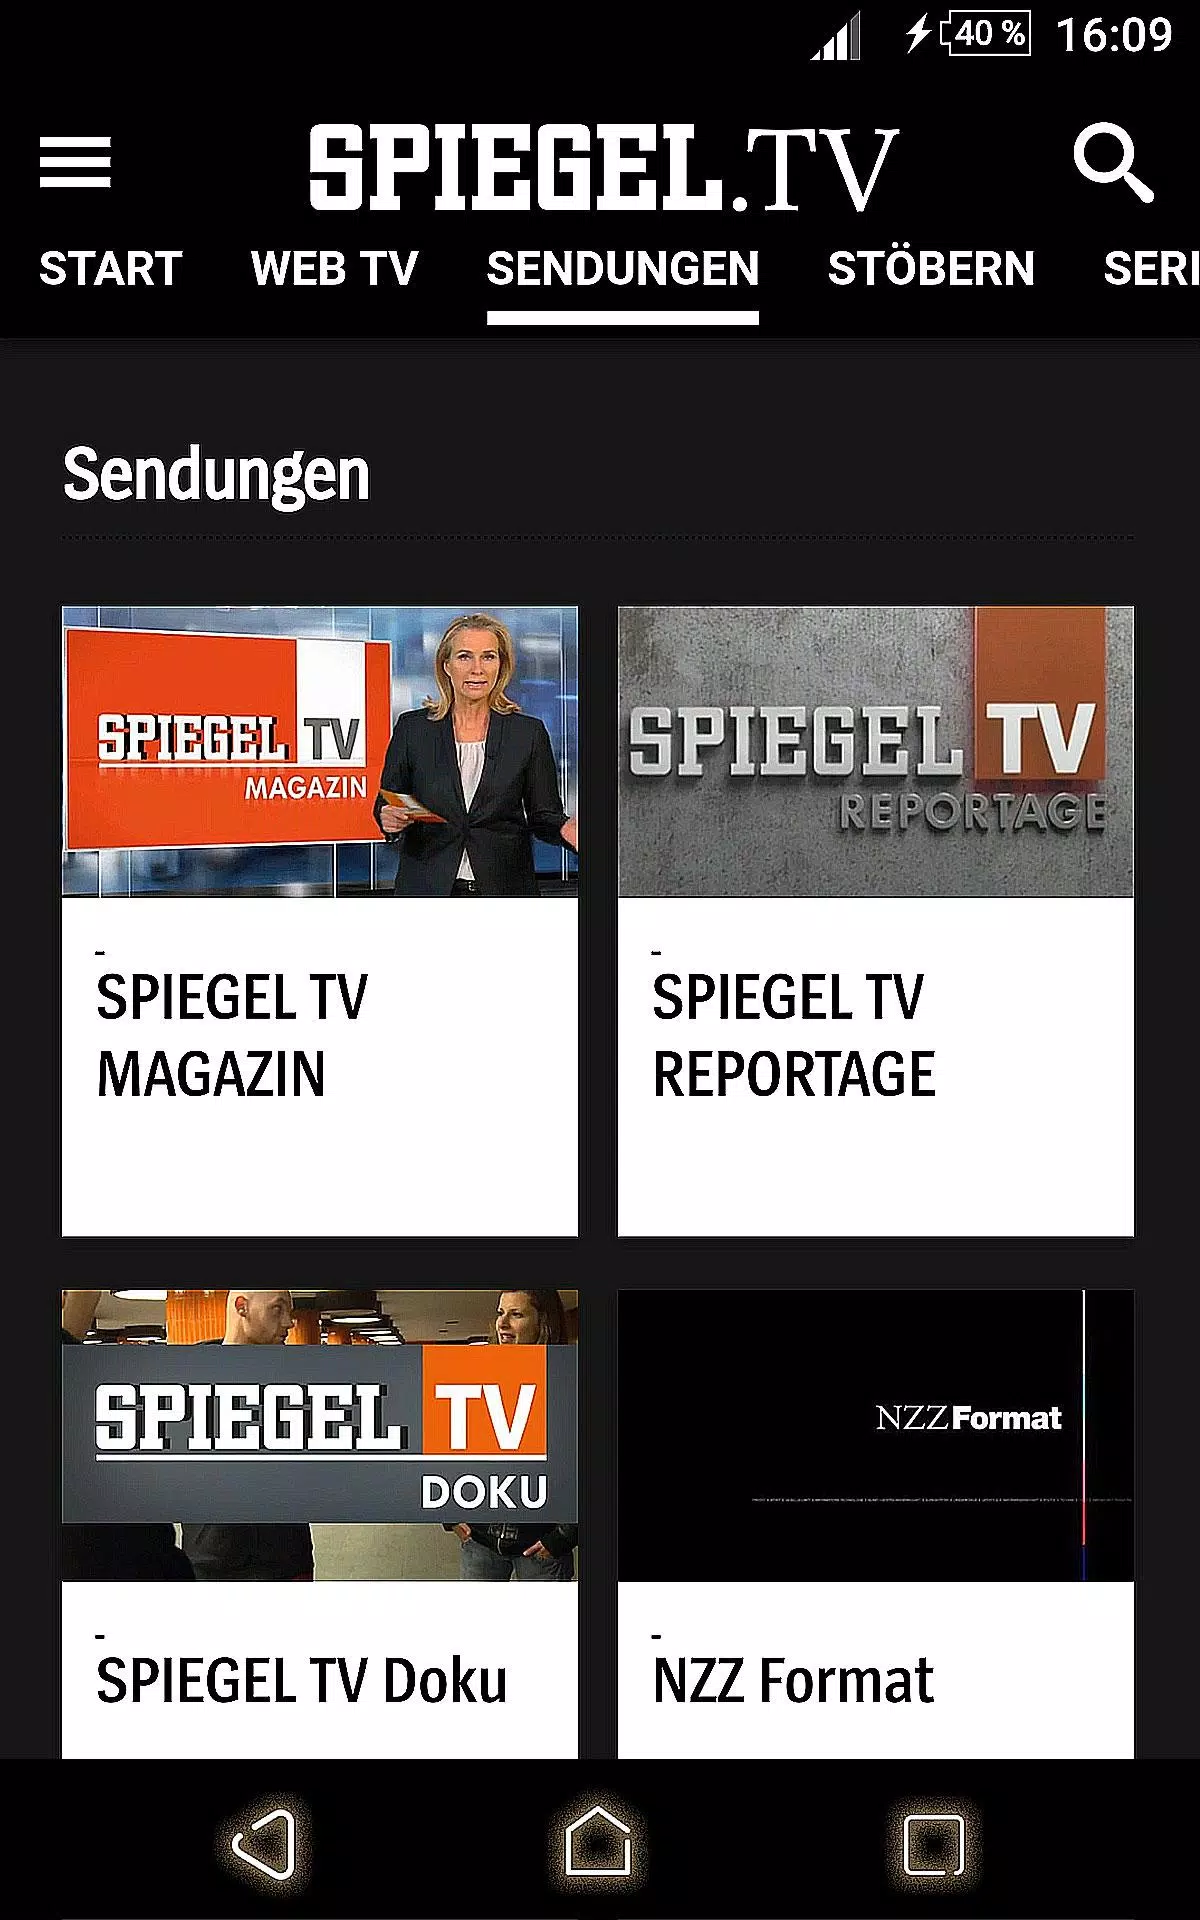 SPIEGEL.TV for Android - APK Download